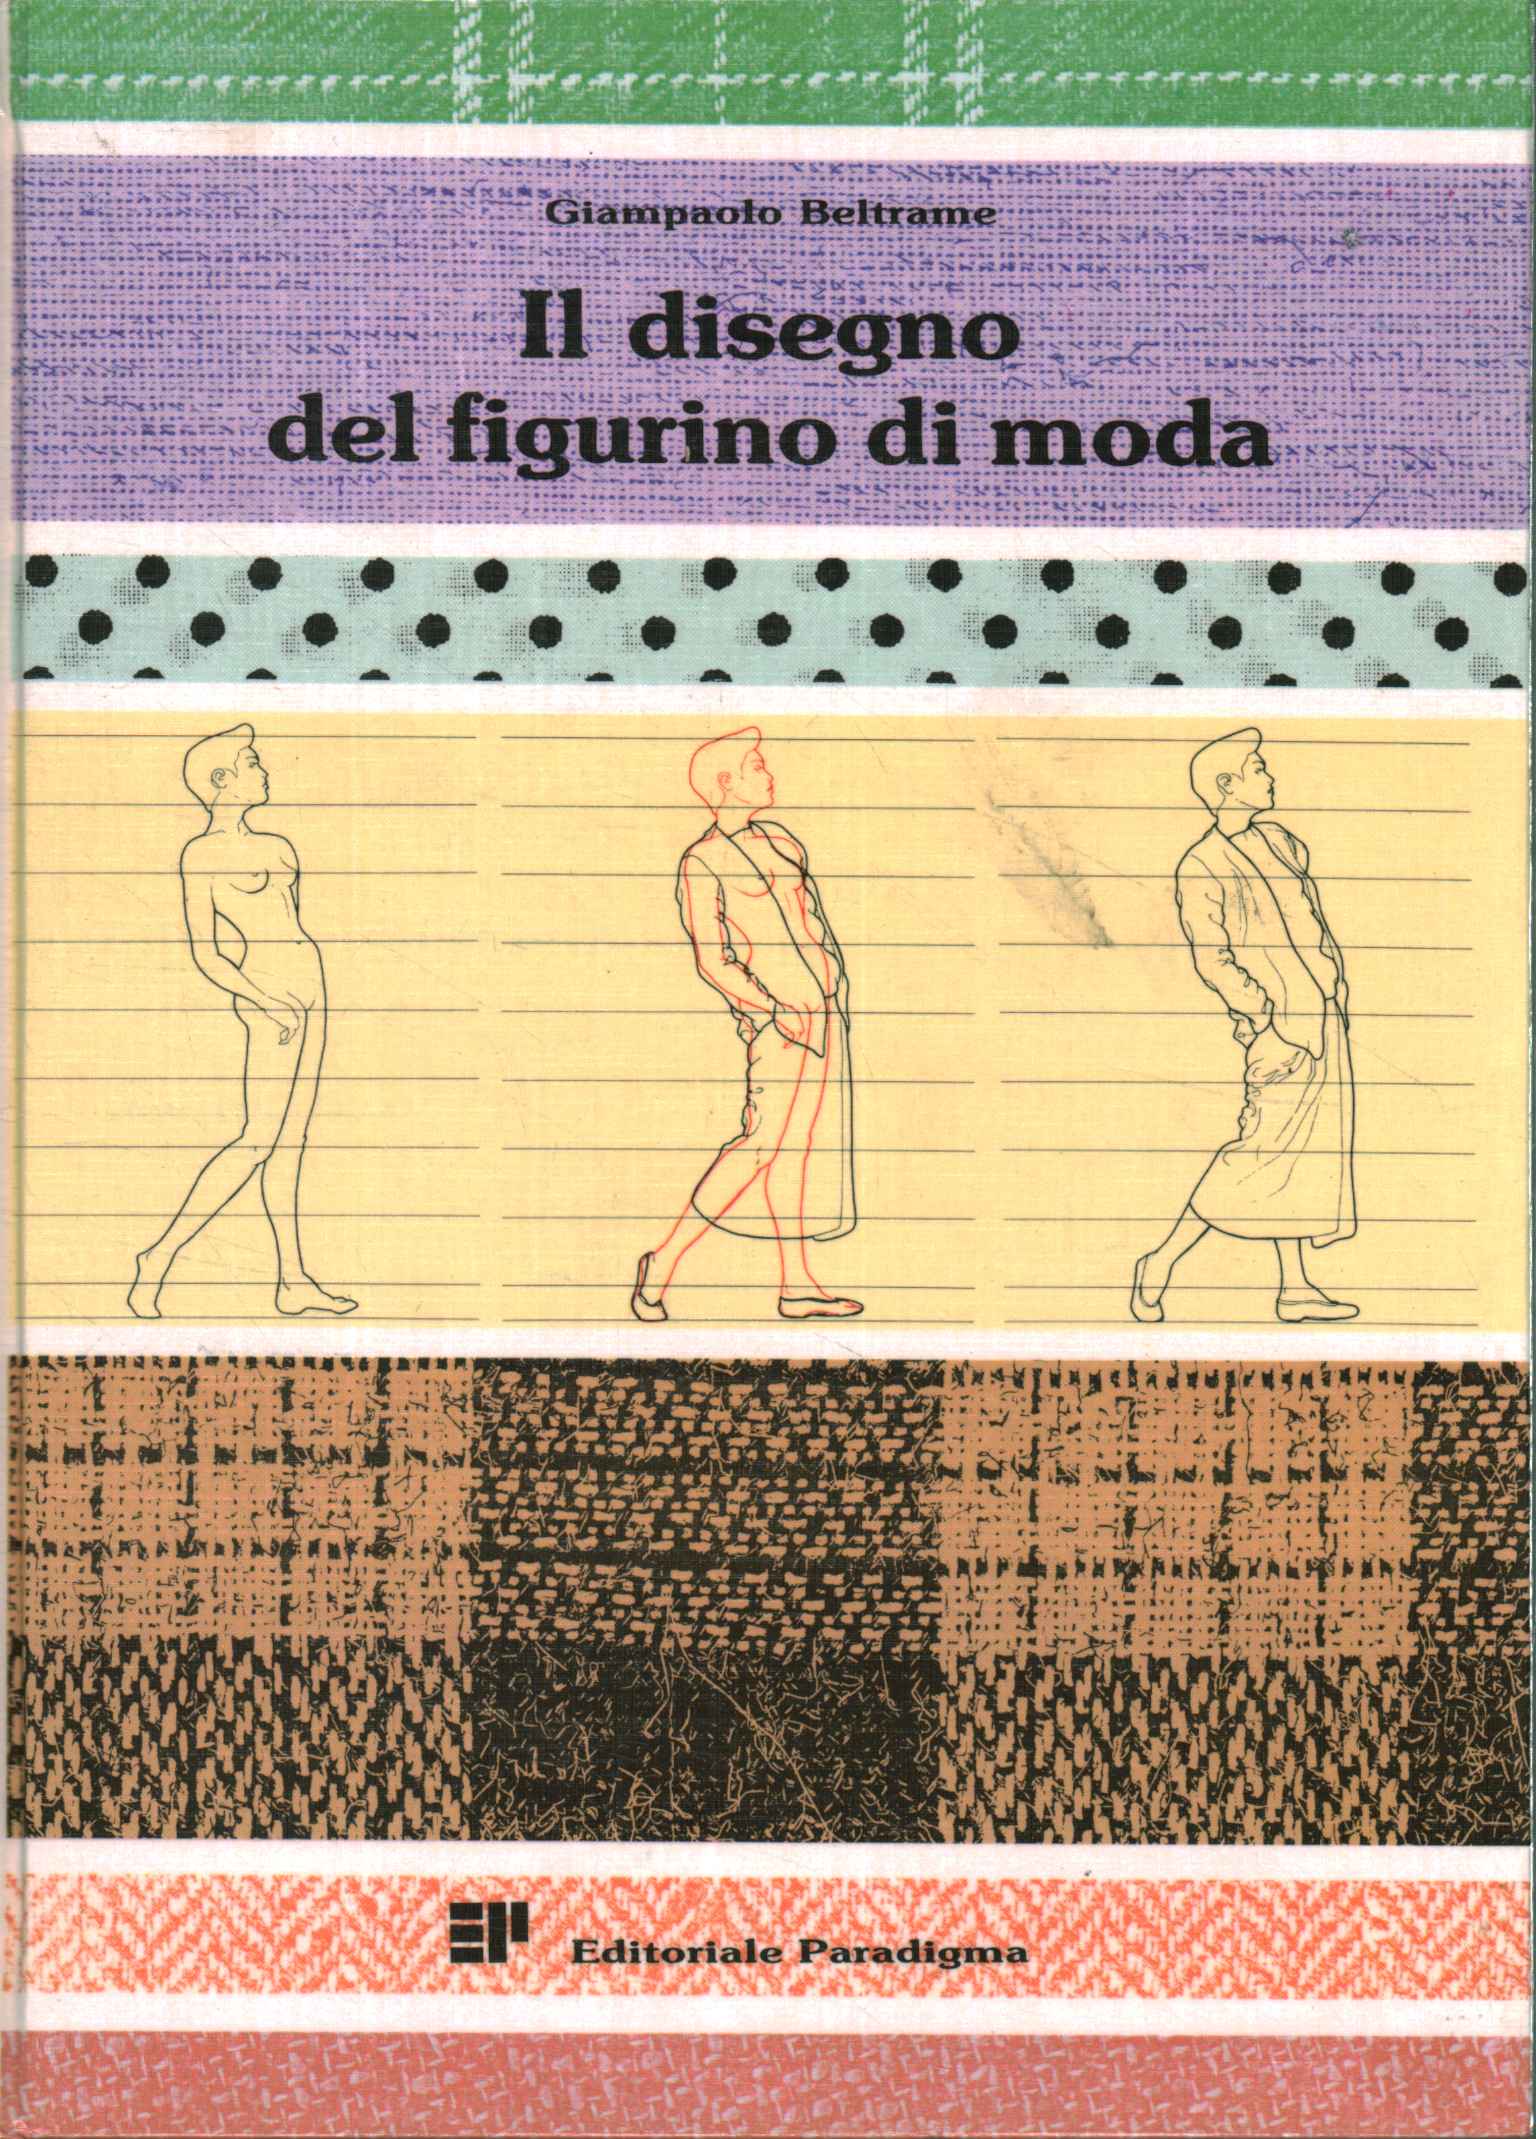 The drawing of the fashion sketch